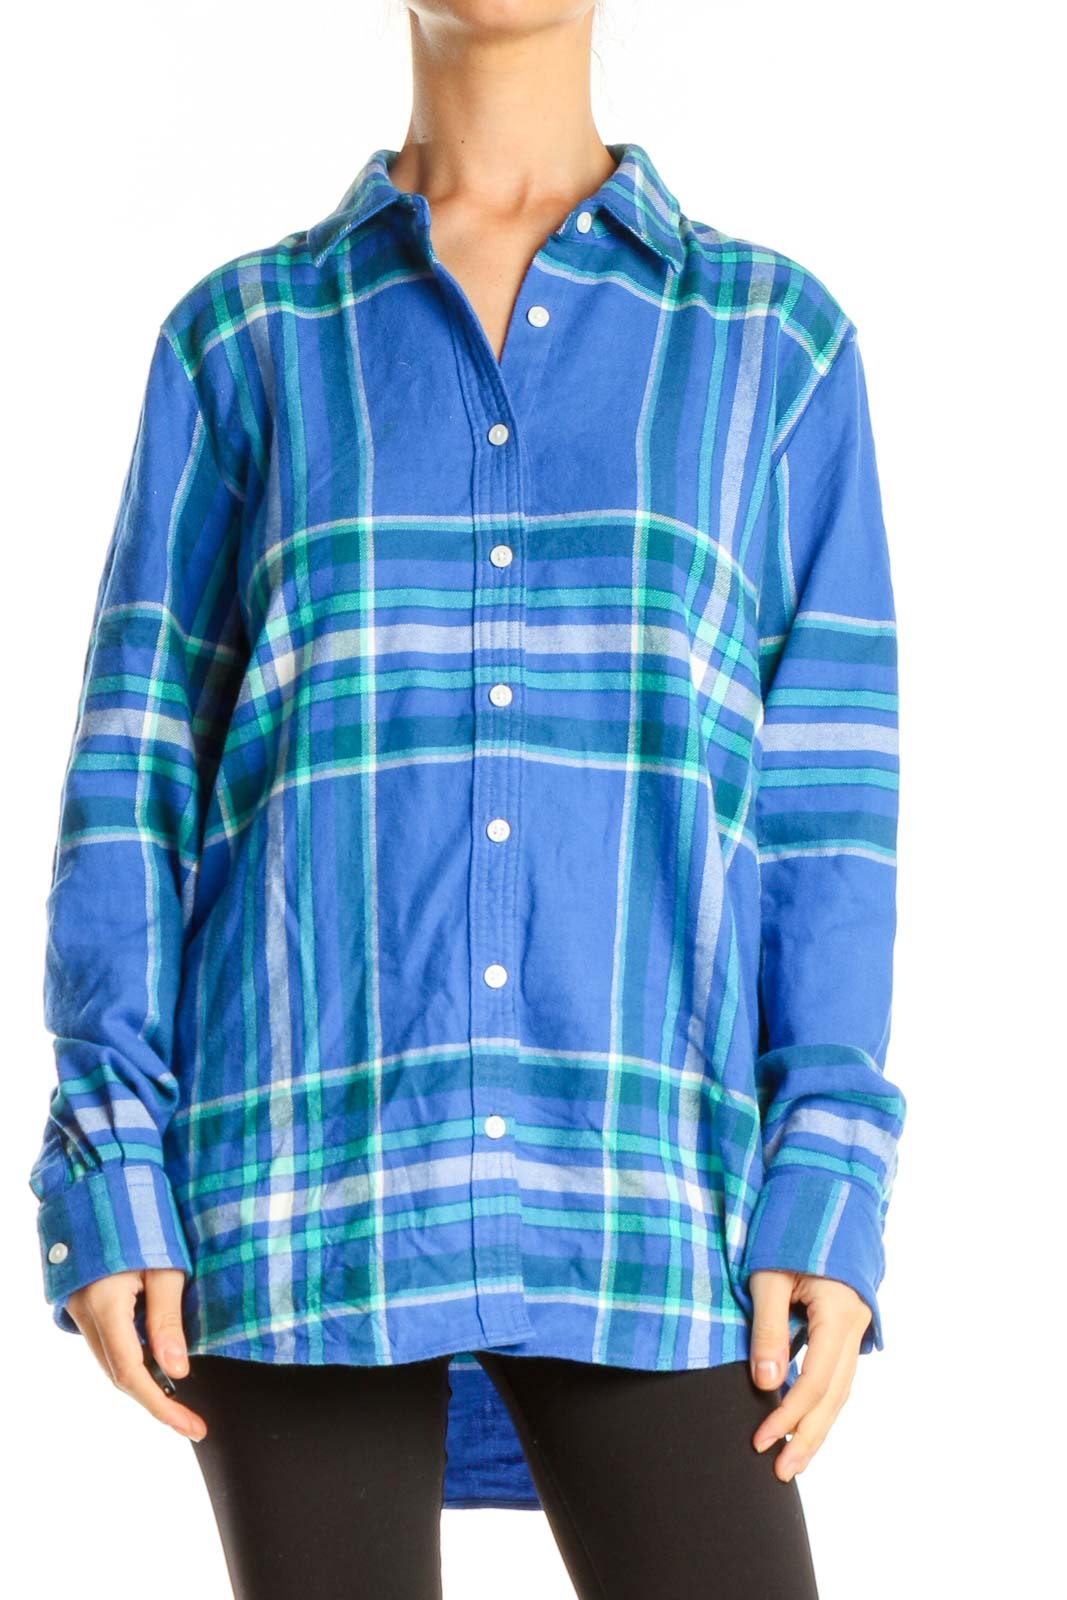 Blue Plaid Casual Top Front